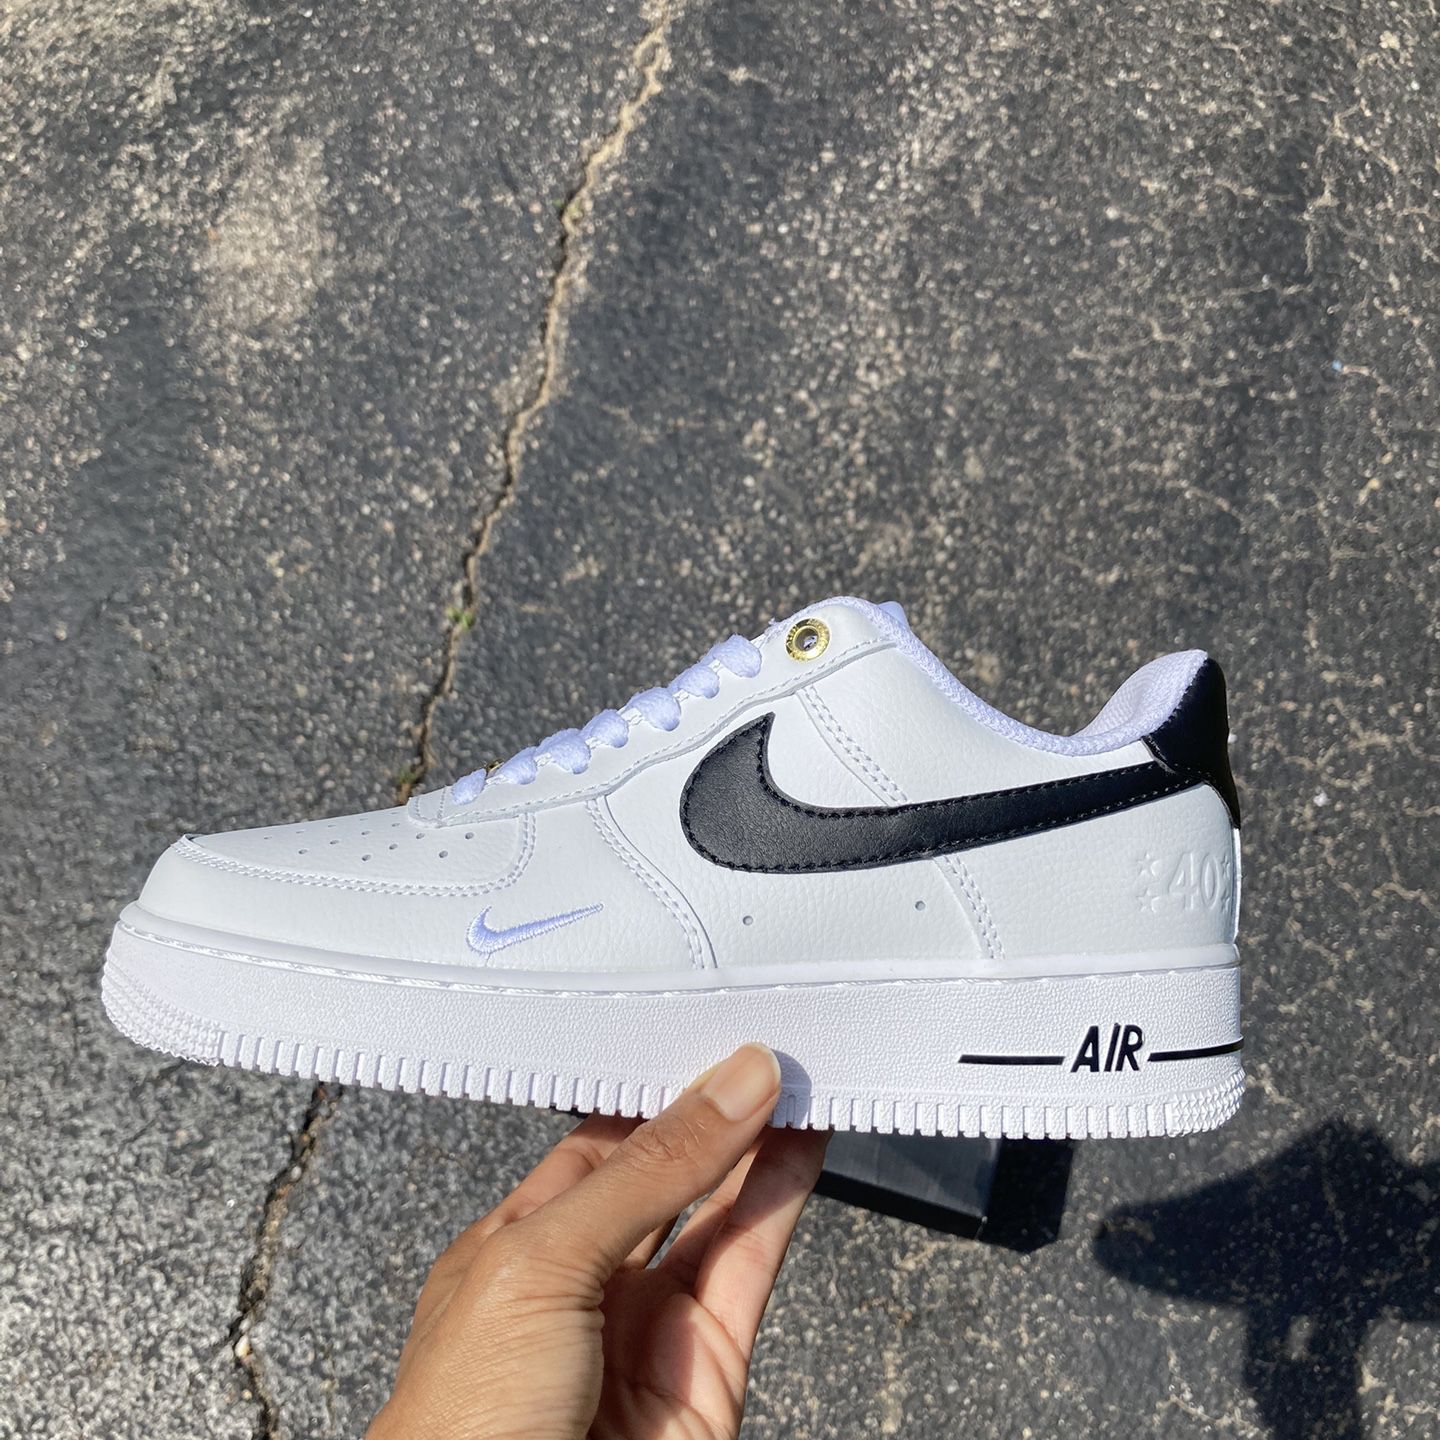 NIKE - AIR FORCE 1 07 LV8 WHITE/BLACK for Sale in Brockton, MA